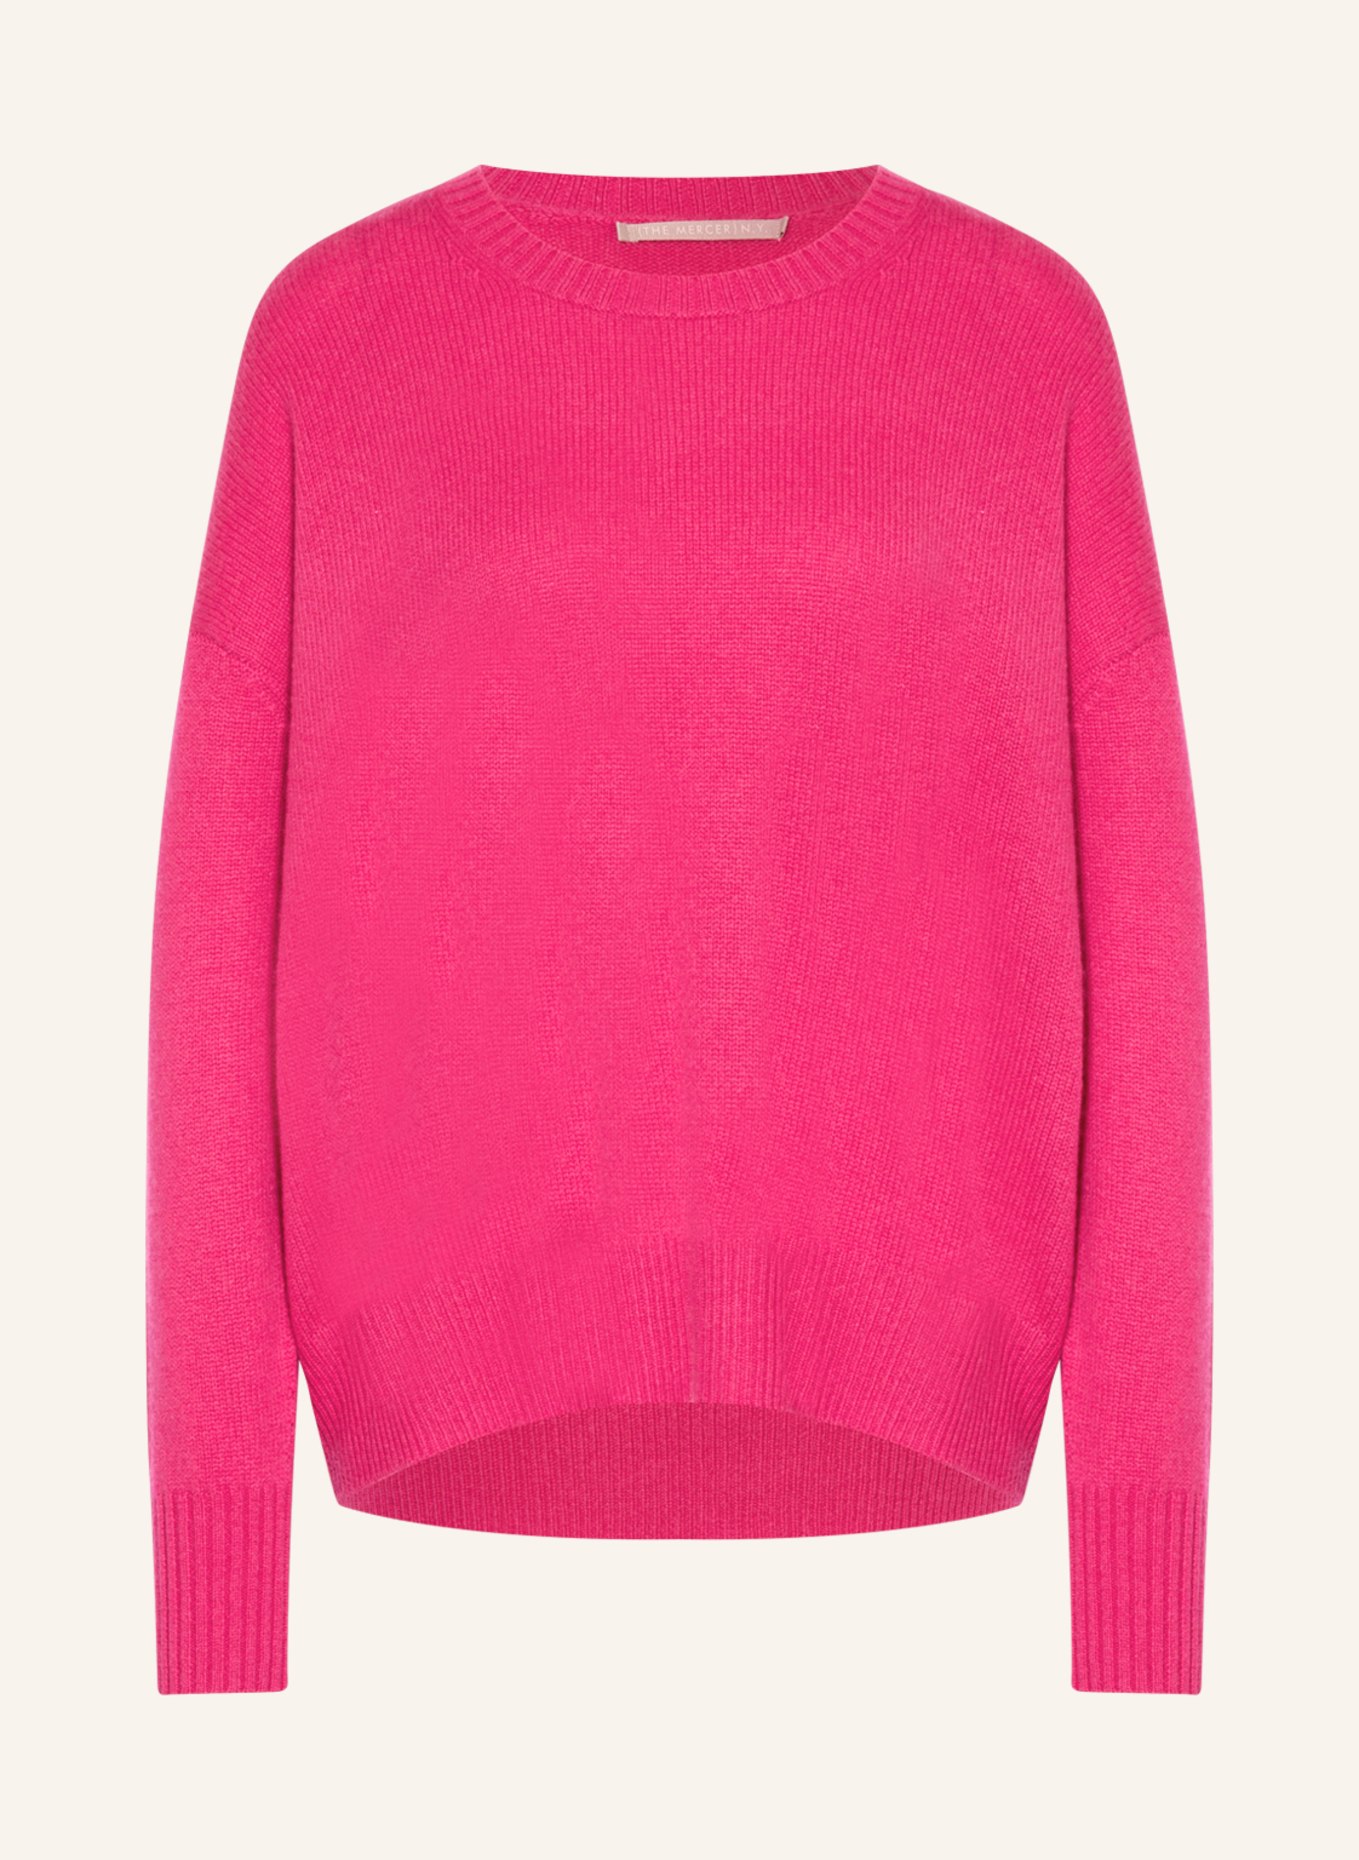 (THE MERCER) N.Y. Cashmere-Pullover, Farbe: PINK (Bild 1)